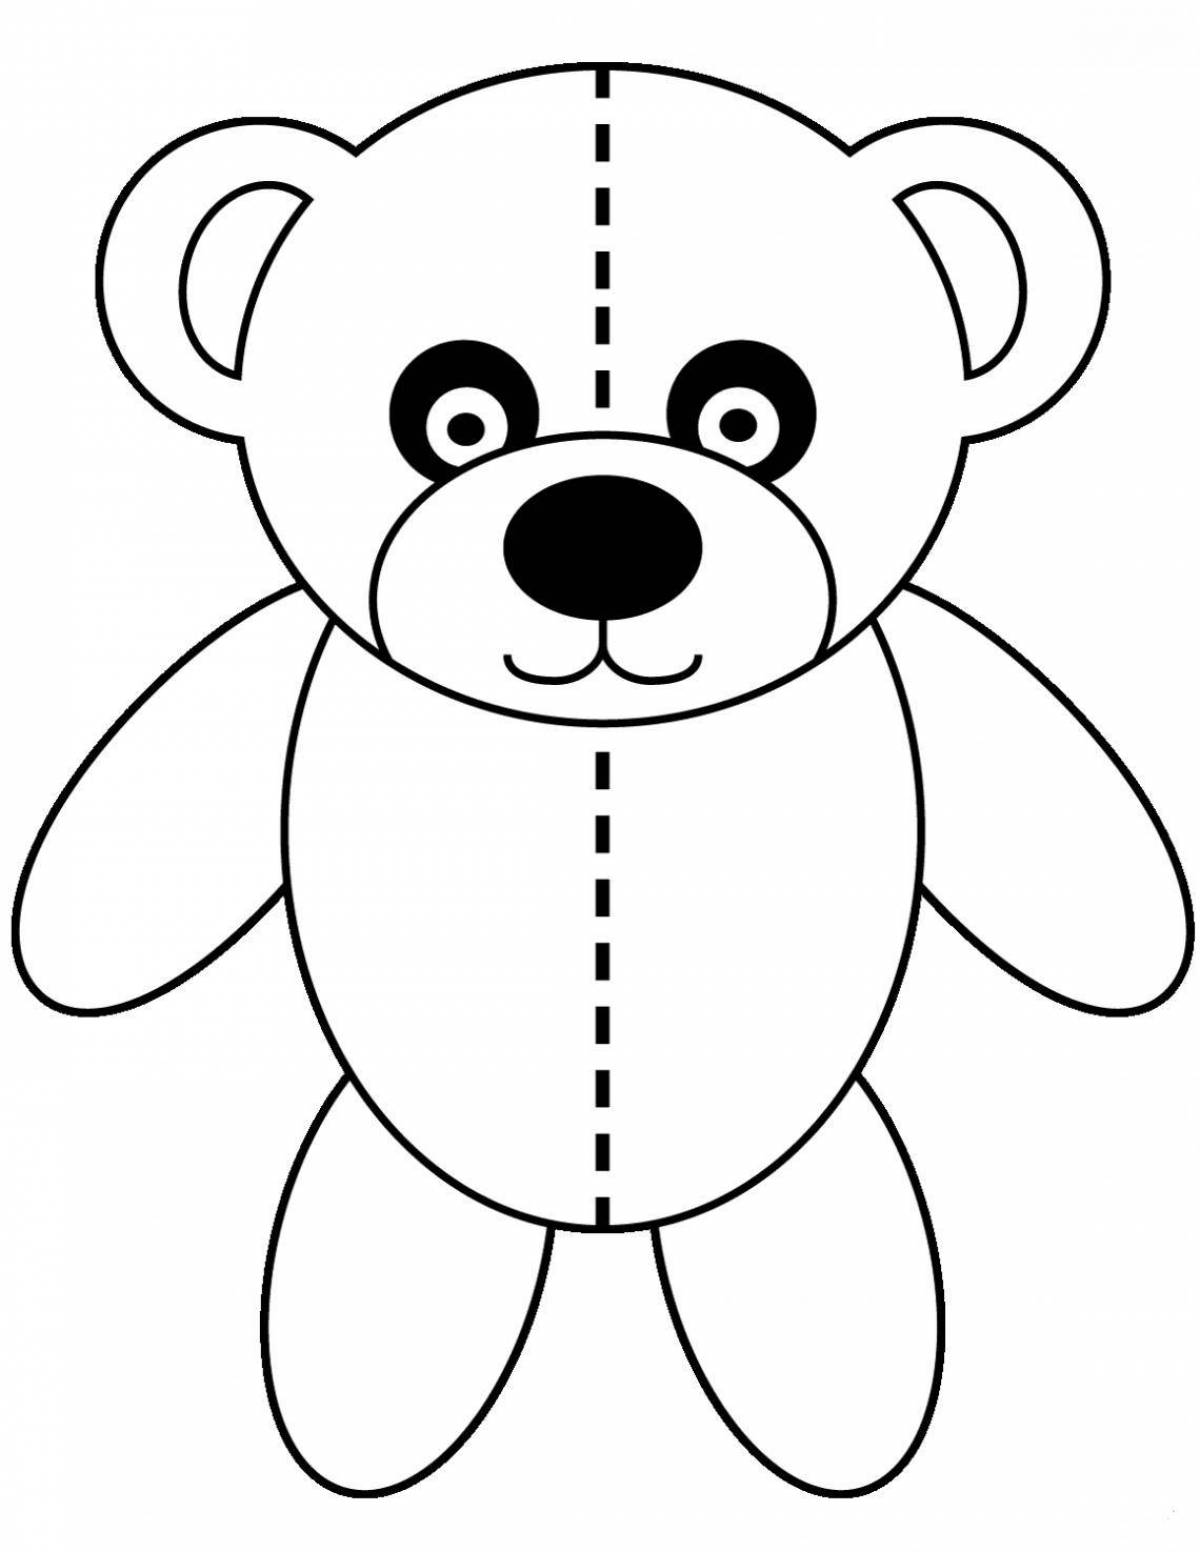 Teddy bear coloring page for 4-5 year olds